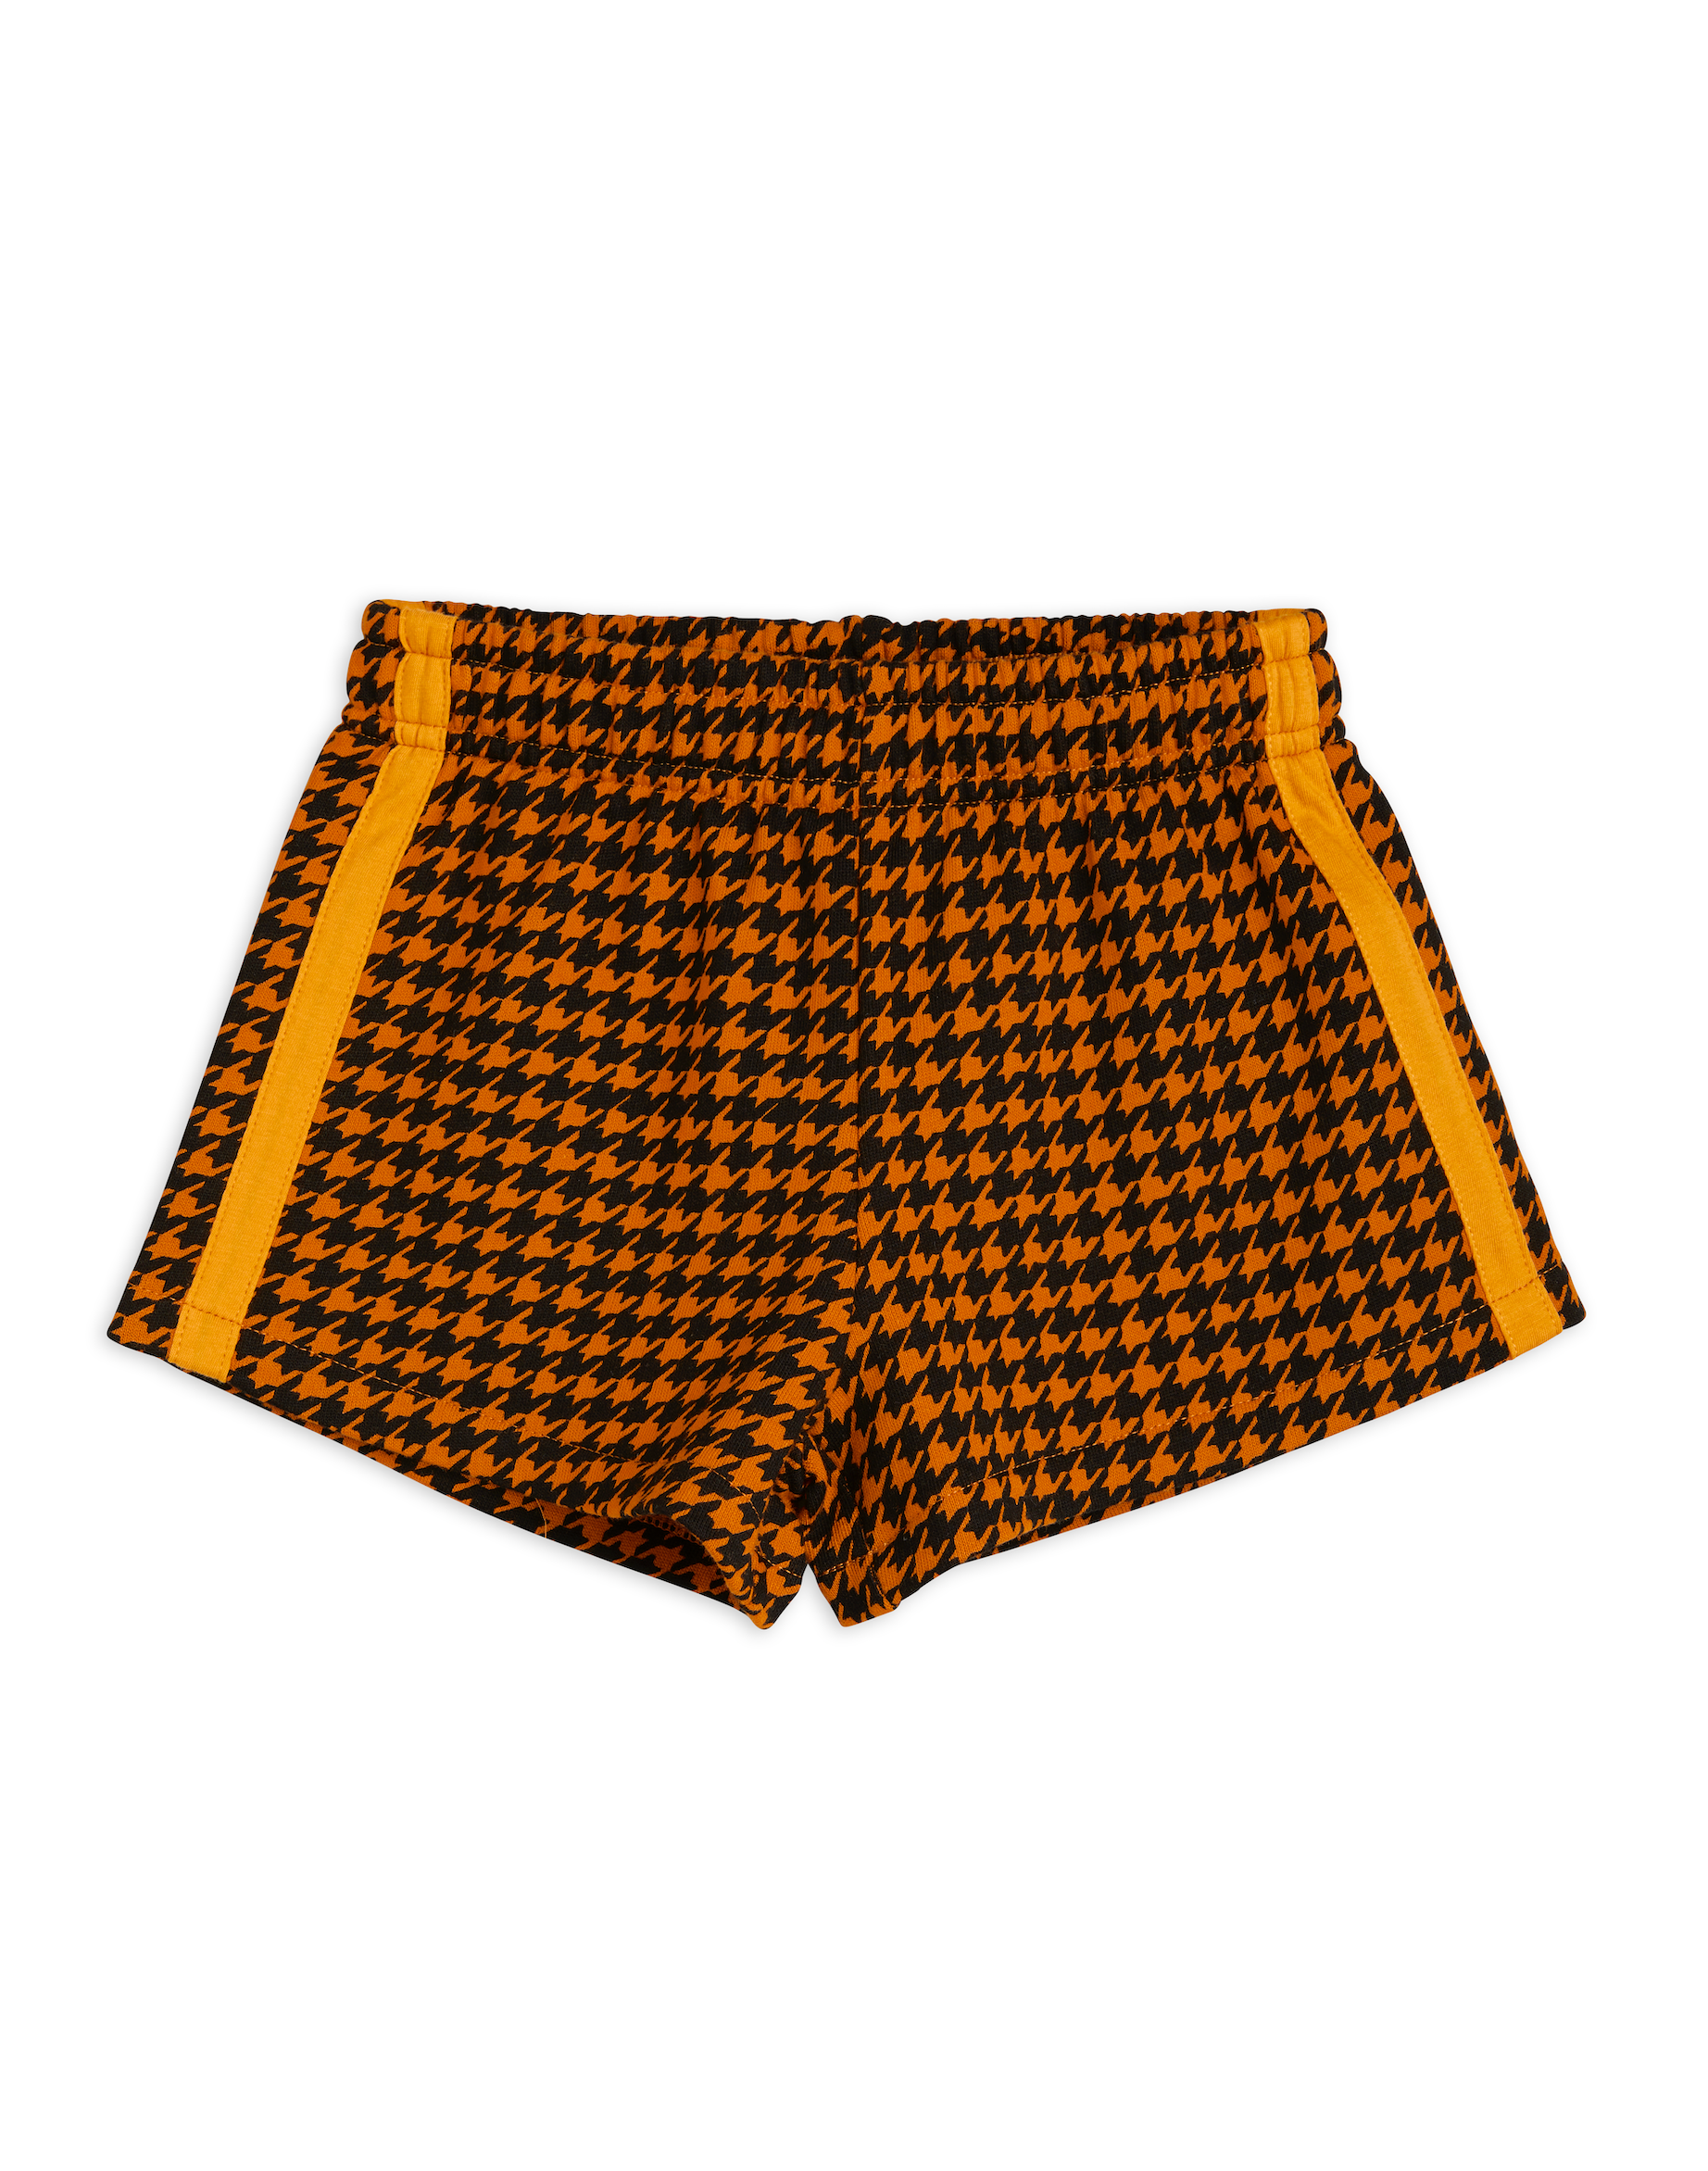 Houndstooth Shorts - Brown